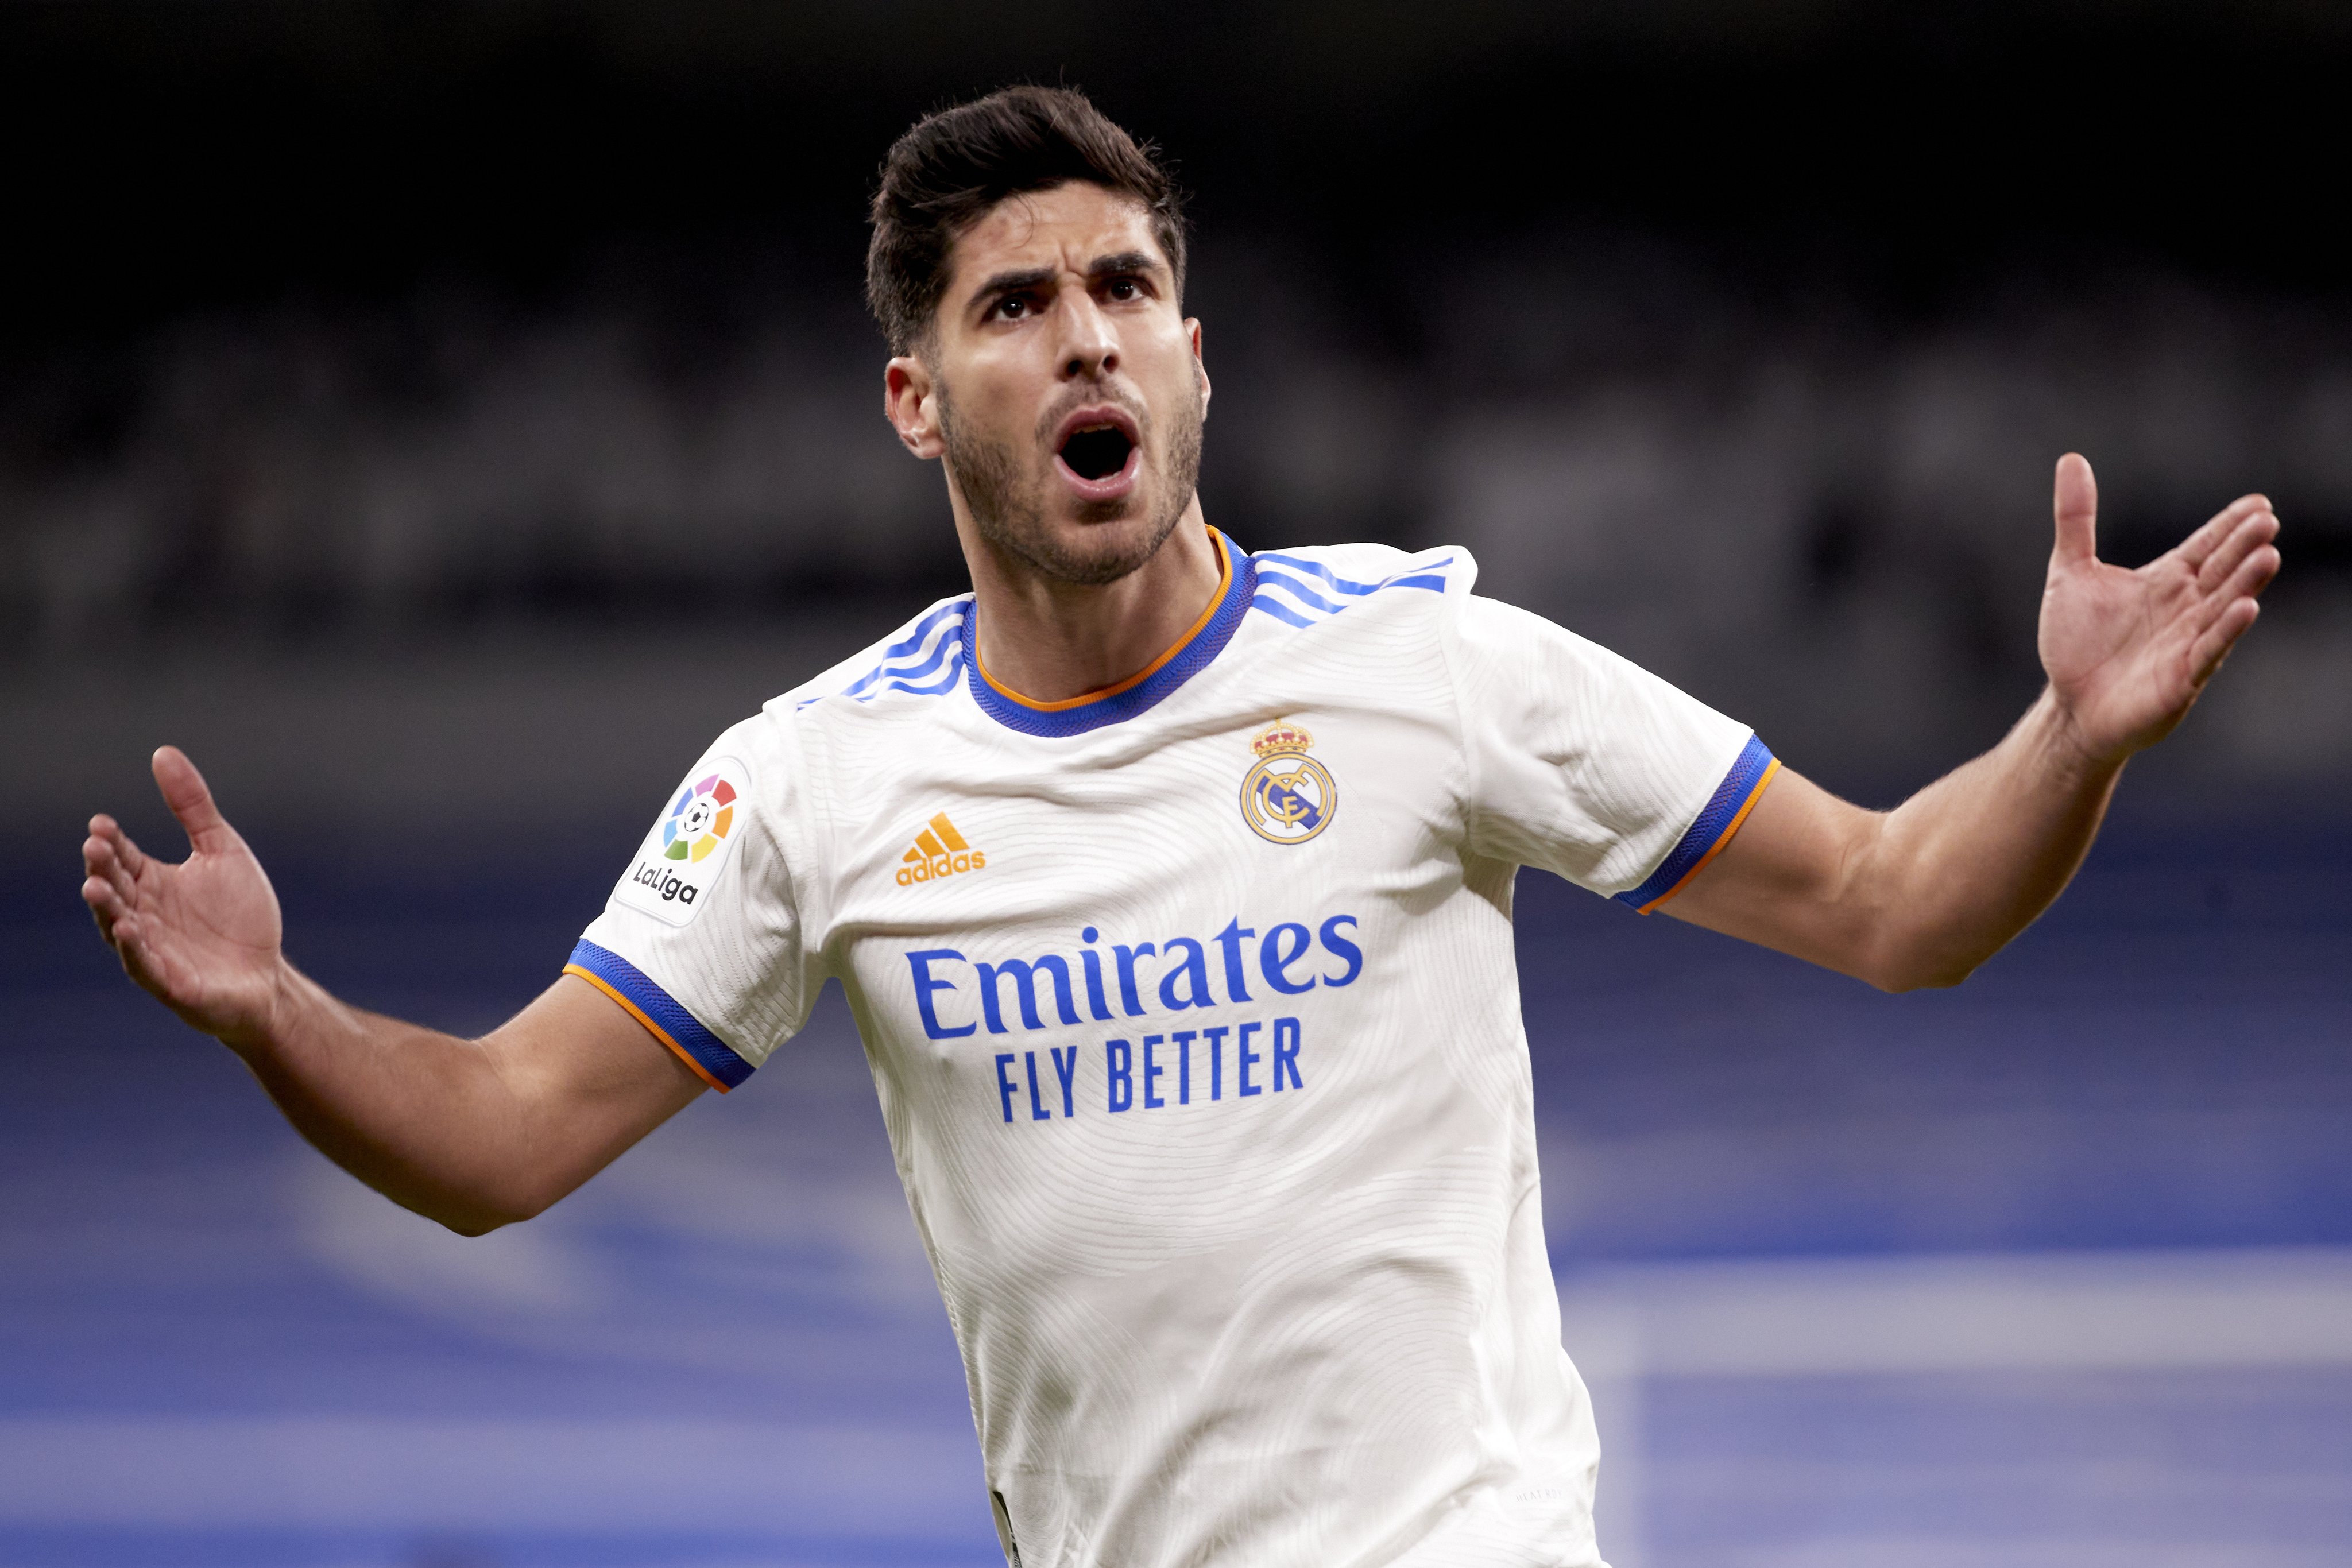 Have one year left on my contract but I think there are possibilities, admits Marco Asensio